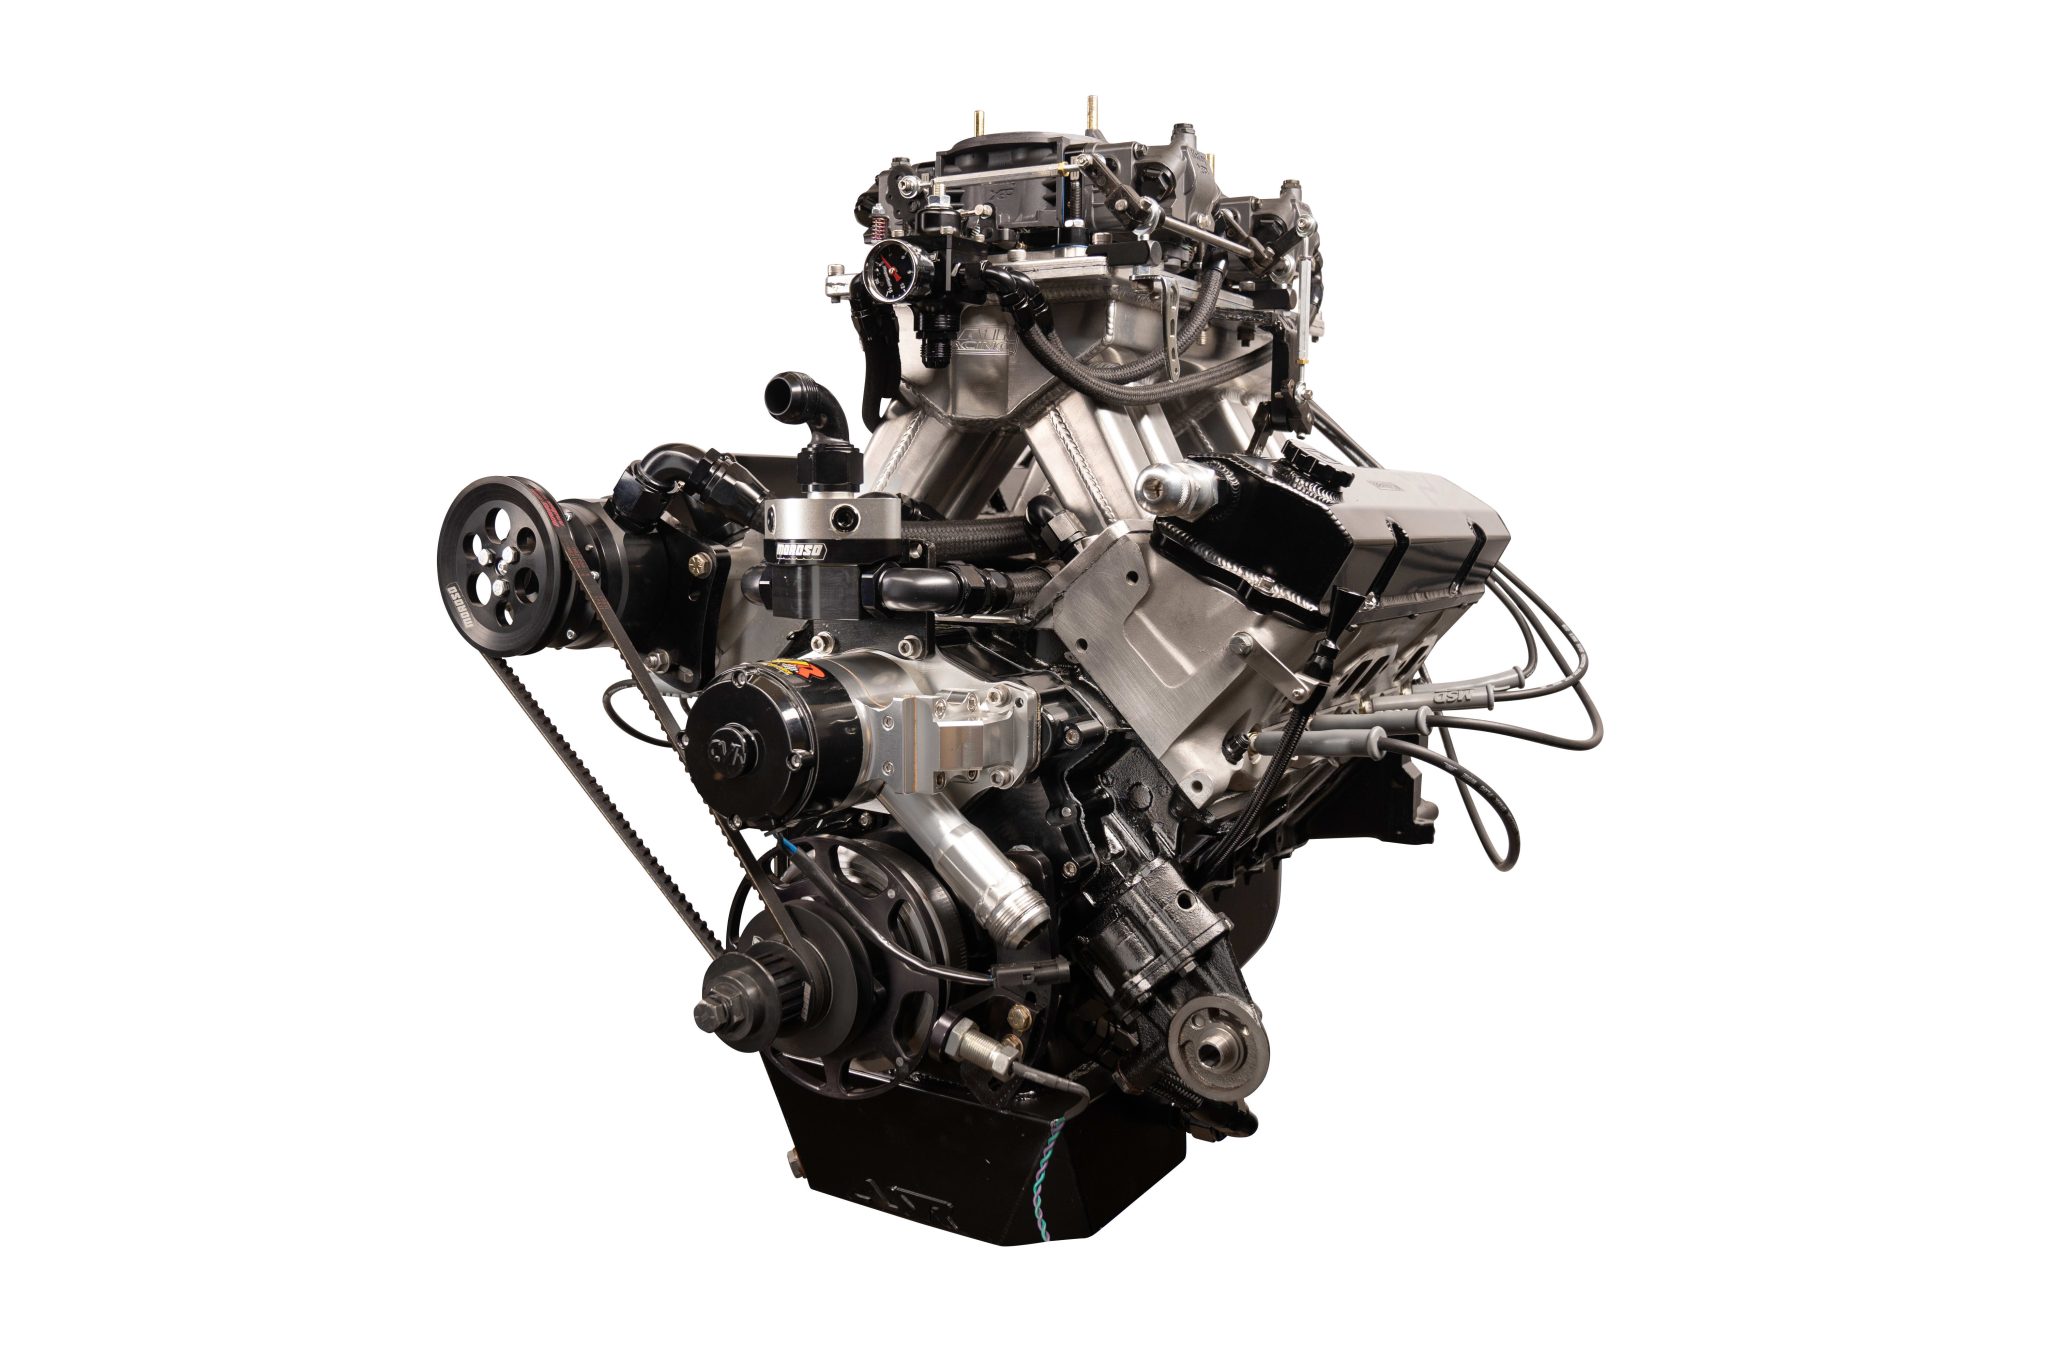 Street Machine Features Knights Engines Holden V 8 2